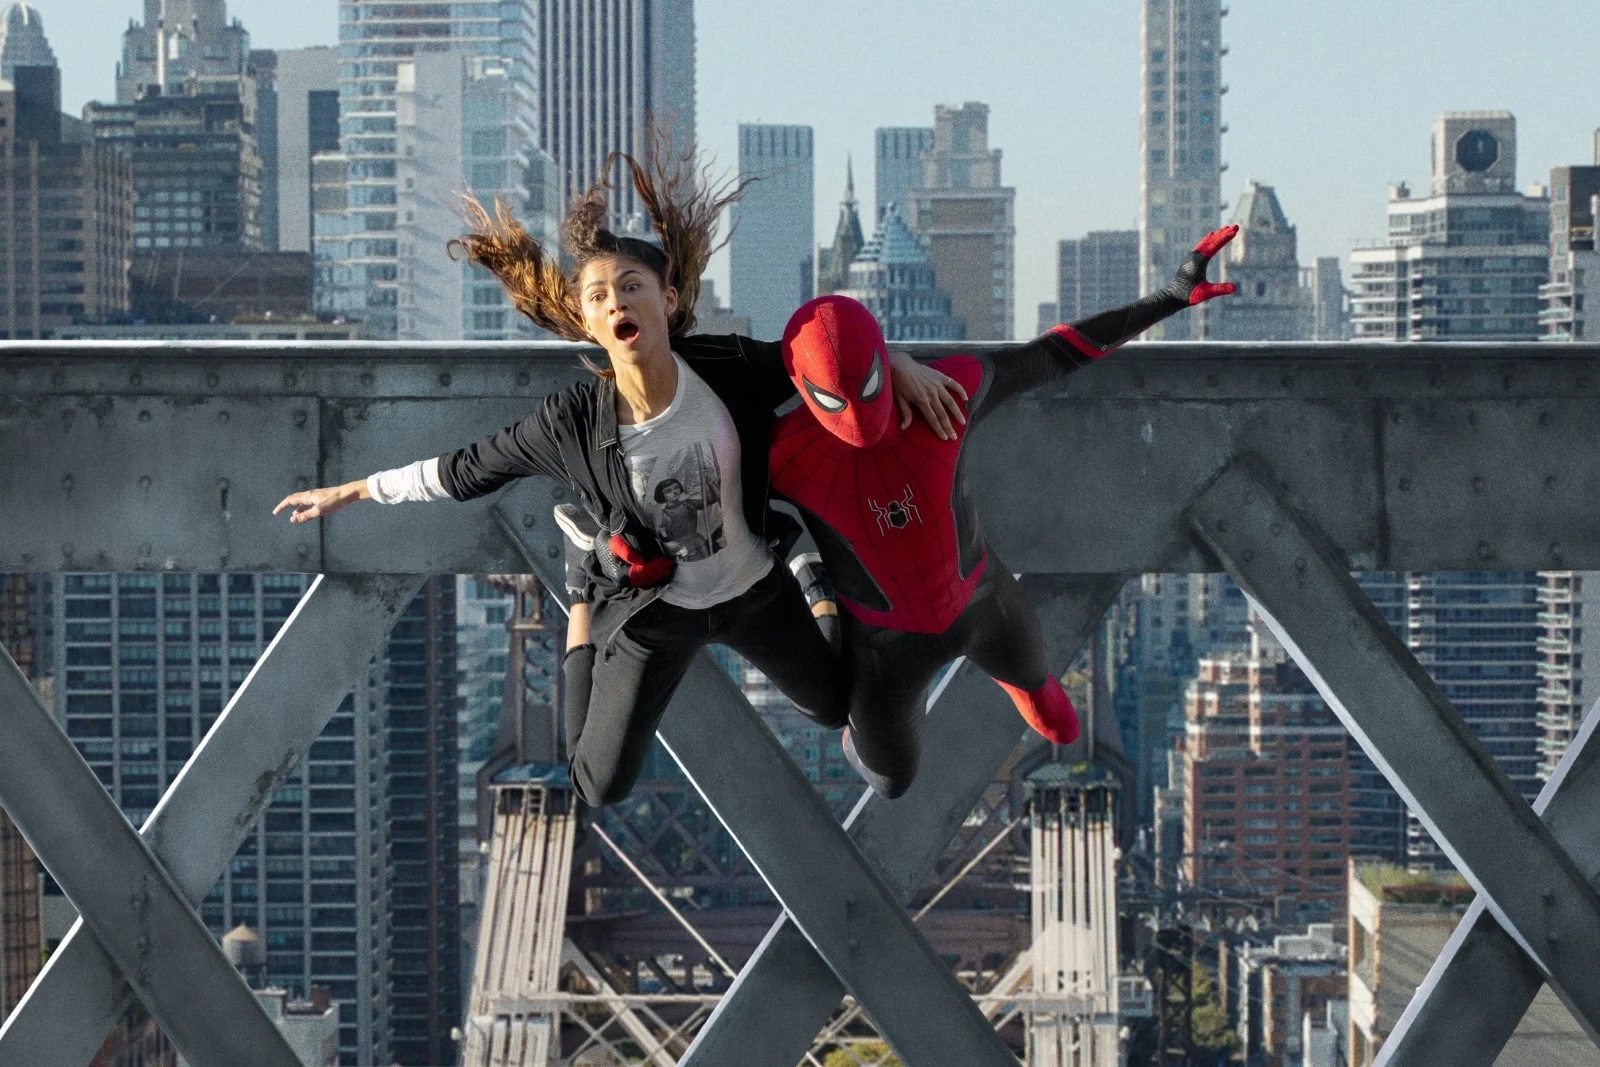 Zendaya et Tom Holland dans Spider-Man: No Way Home (2021) © CTMG. All Rights Reserved. MARVEL and all related character names: © & ™ 2021 MARVEL.